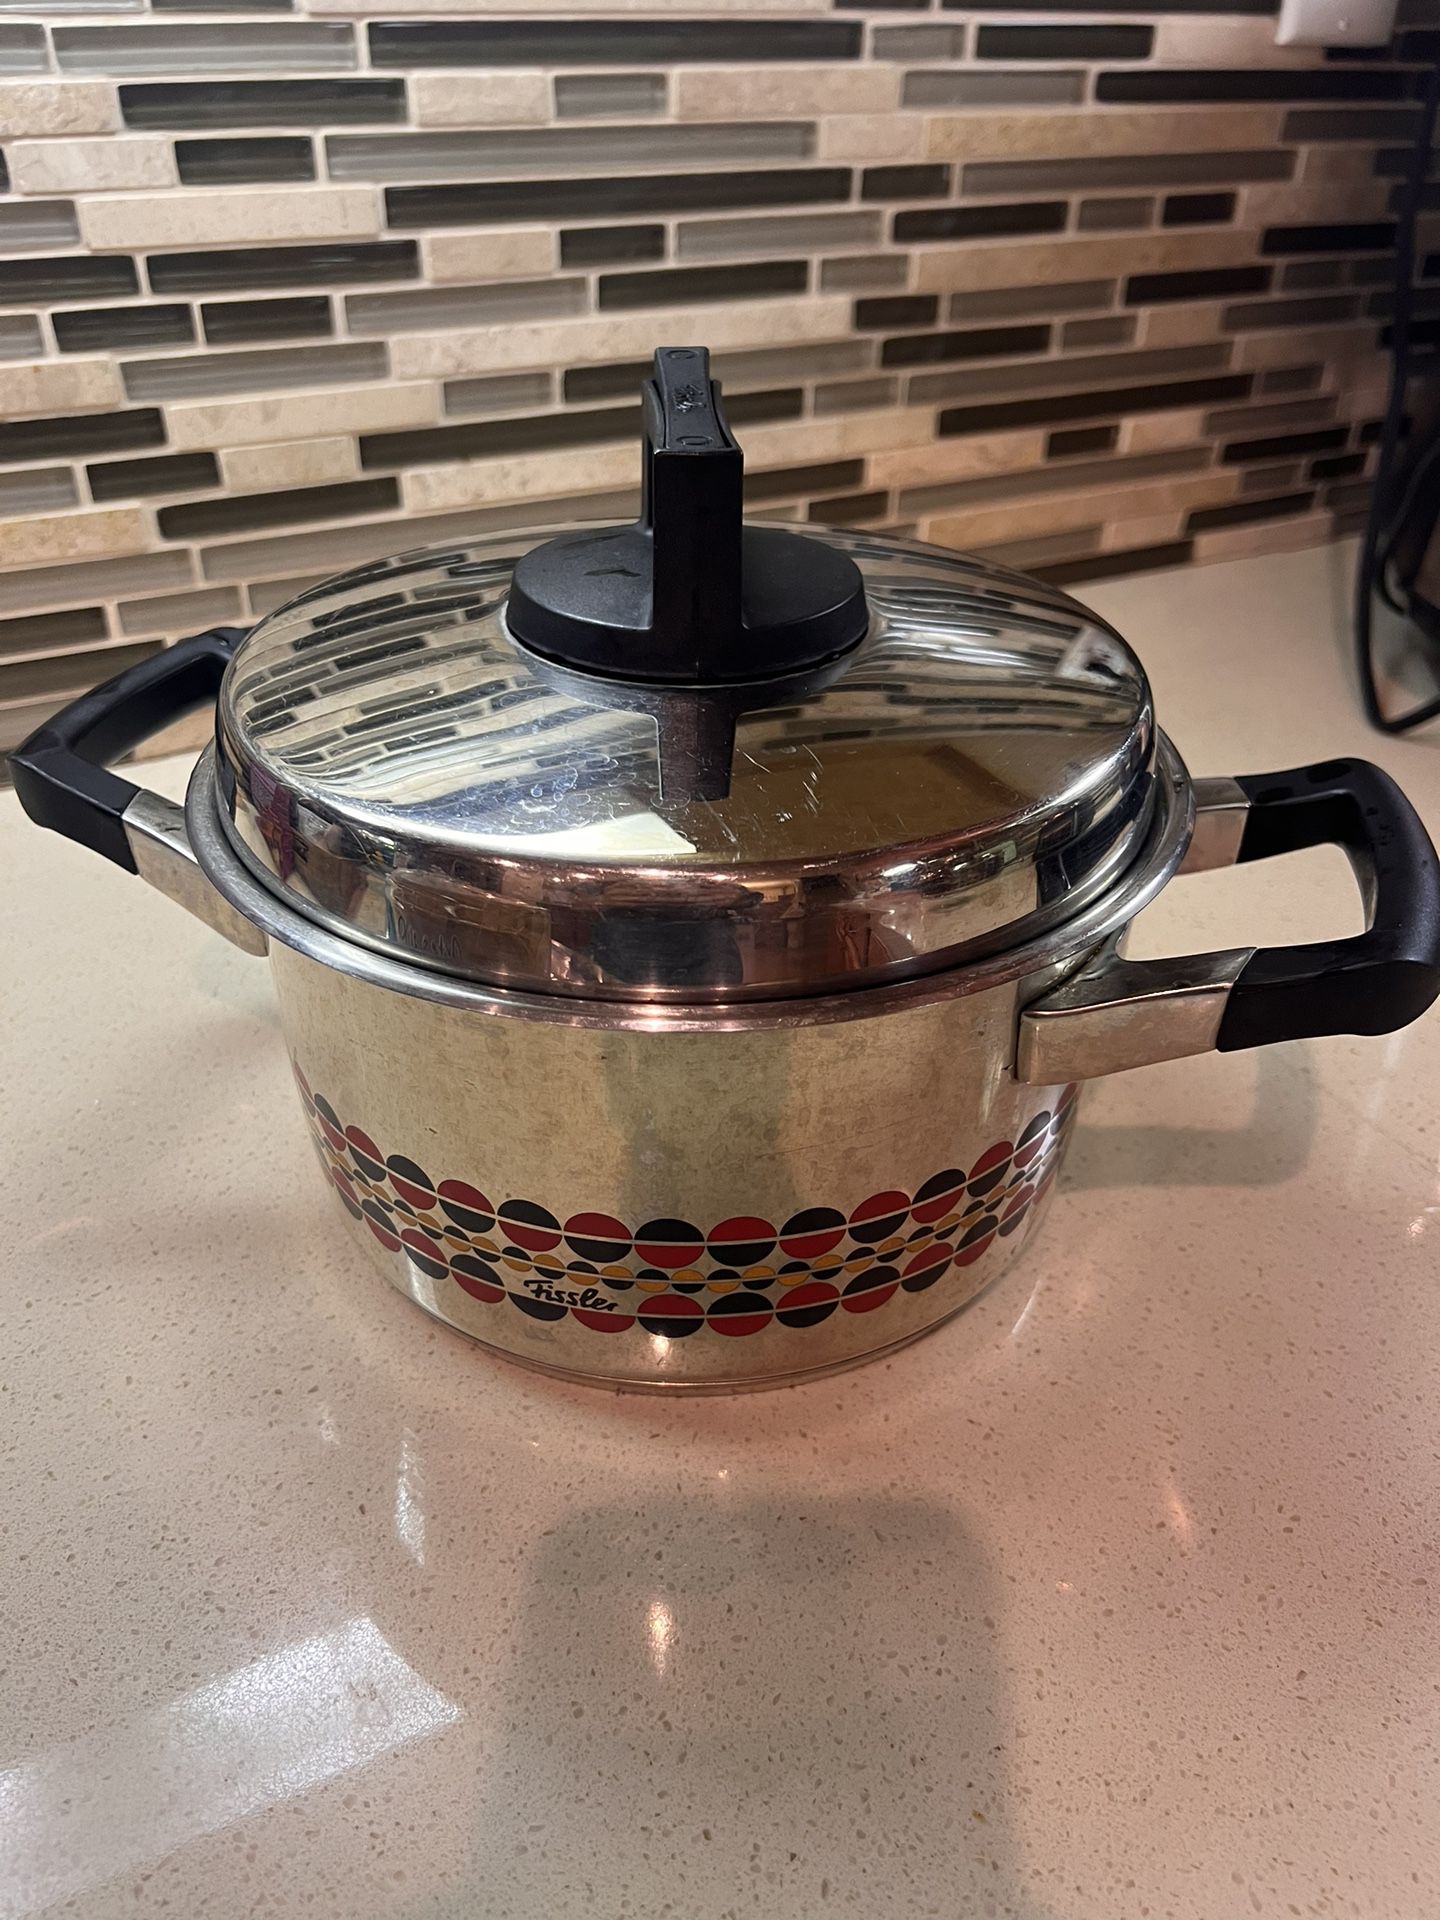 Phantom chef 2.3 Qt Casserole for Sale in Troutdale, OR - OfferUp